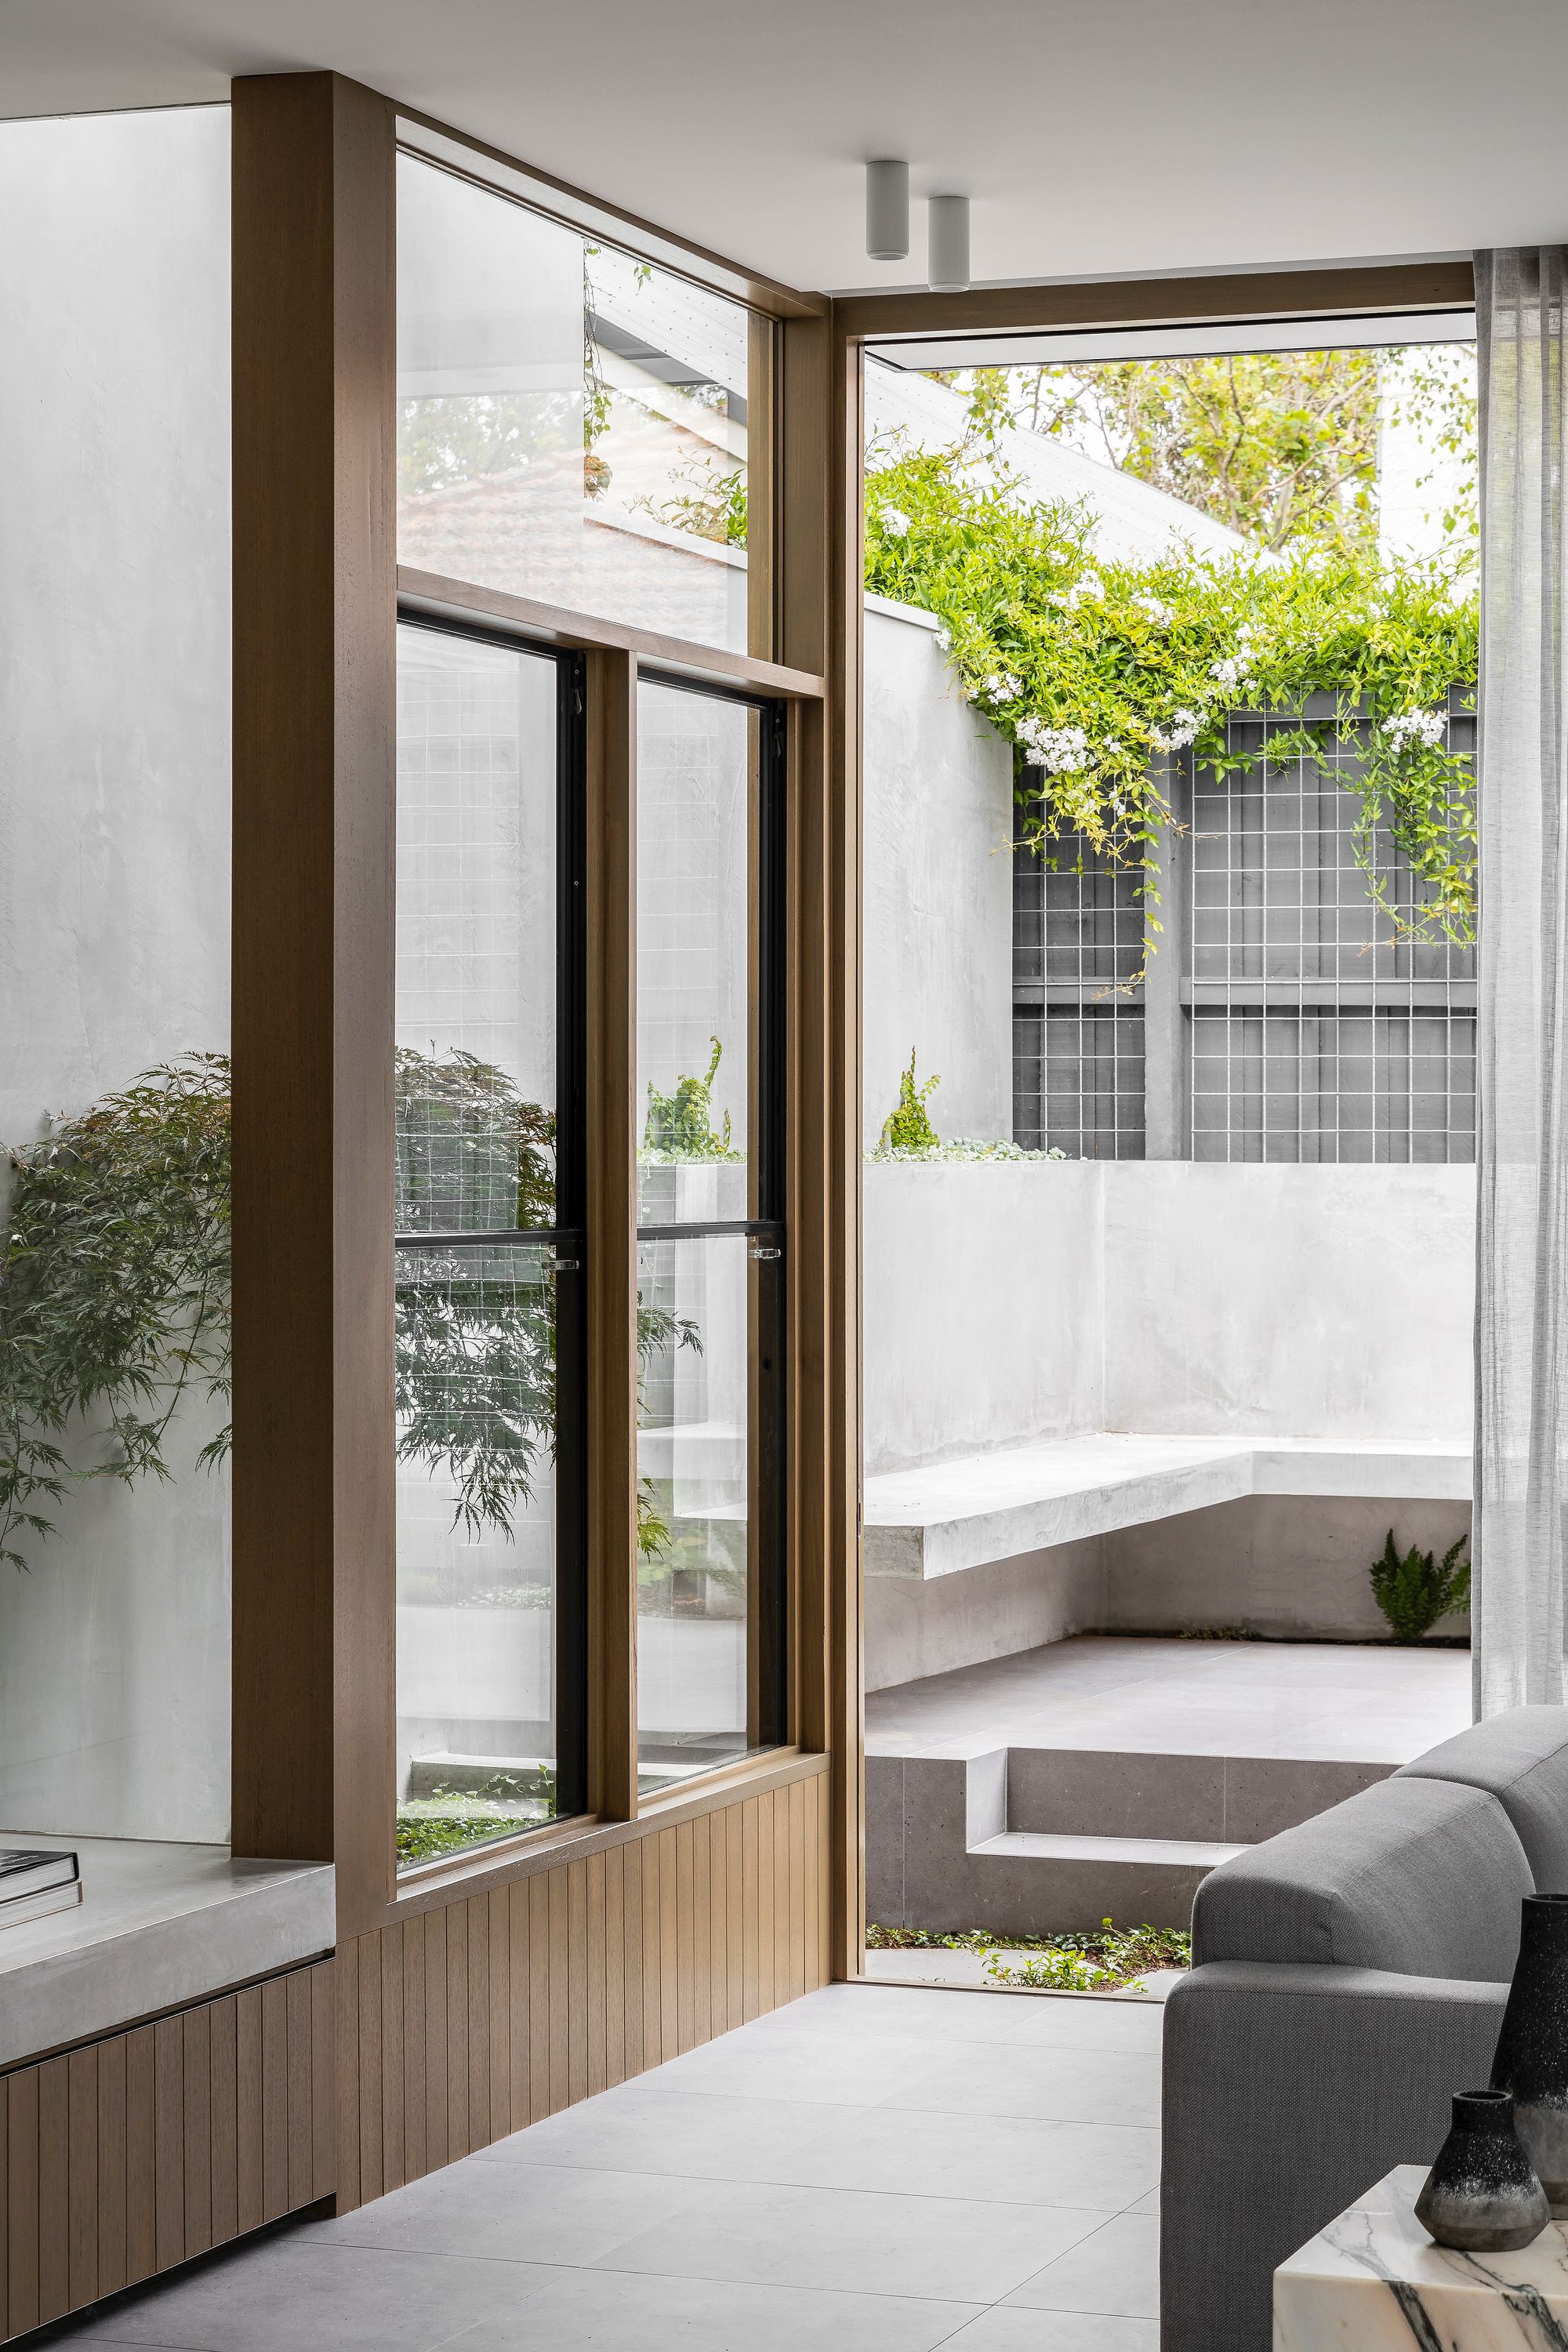 Ripponlea House by Luke Fry Architecture & Interior Design showing view out to tiled courtyard with concrete bench seat